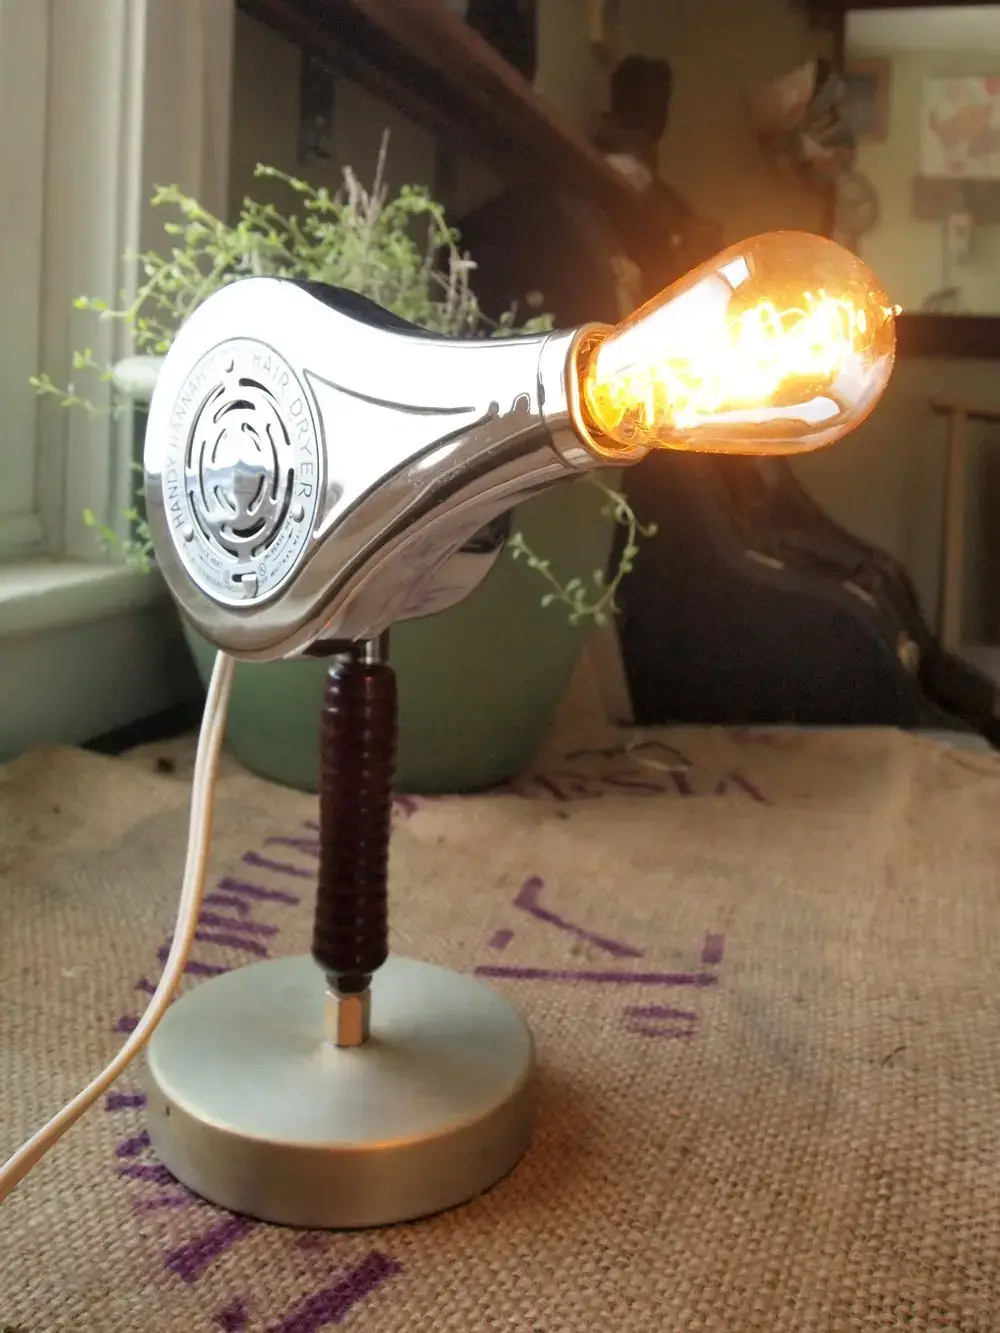 Upcycled hair dryer turned into a novel desk lamp.